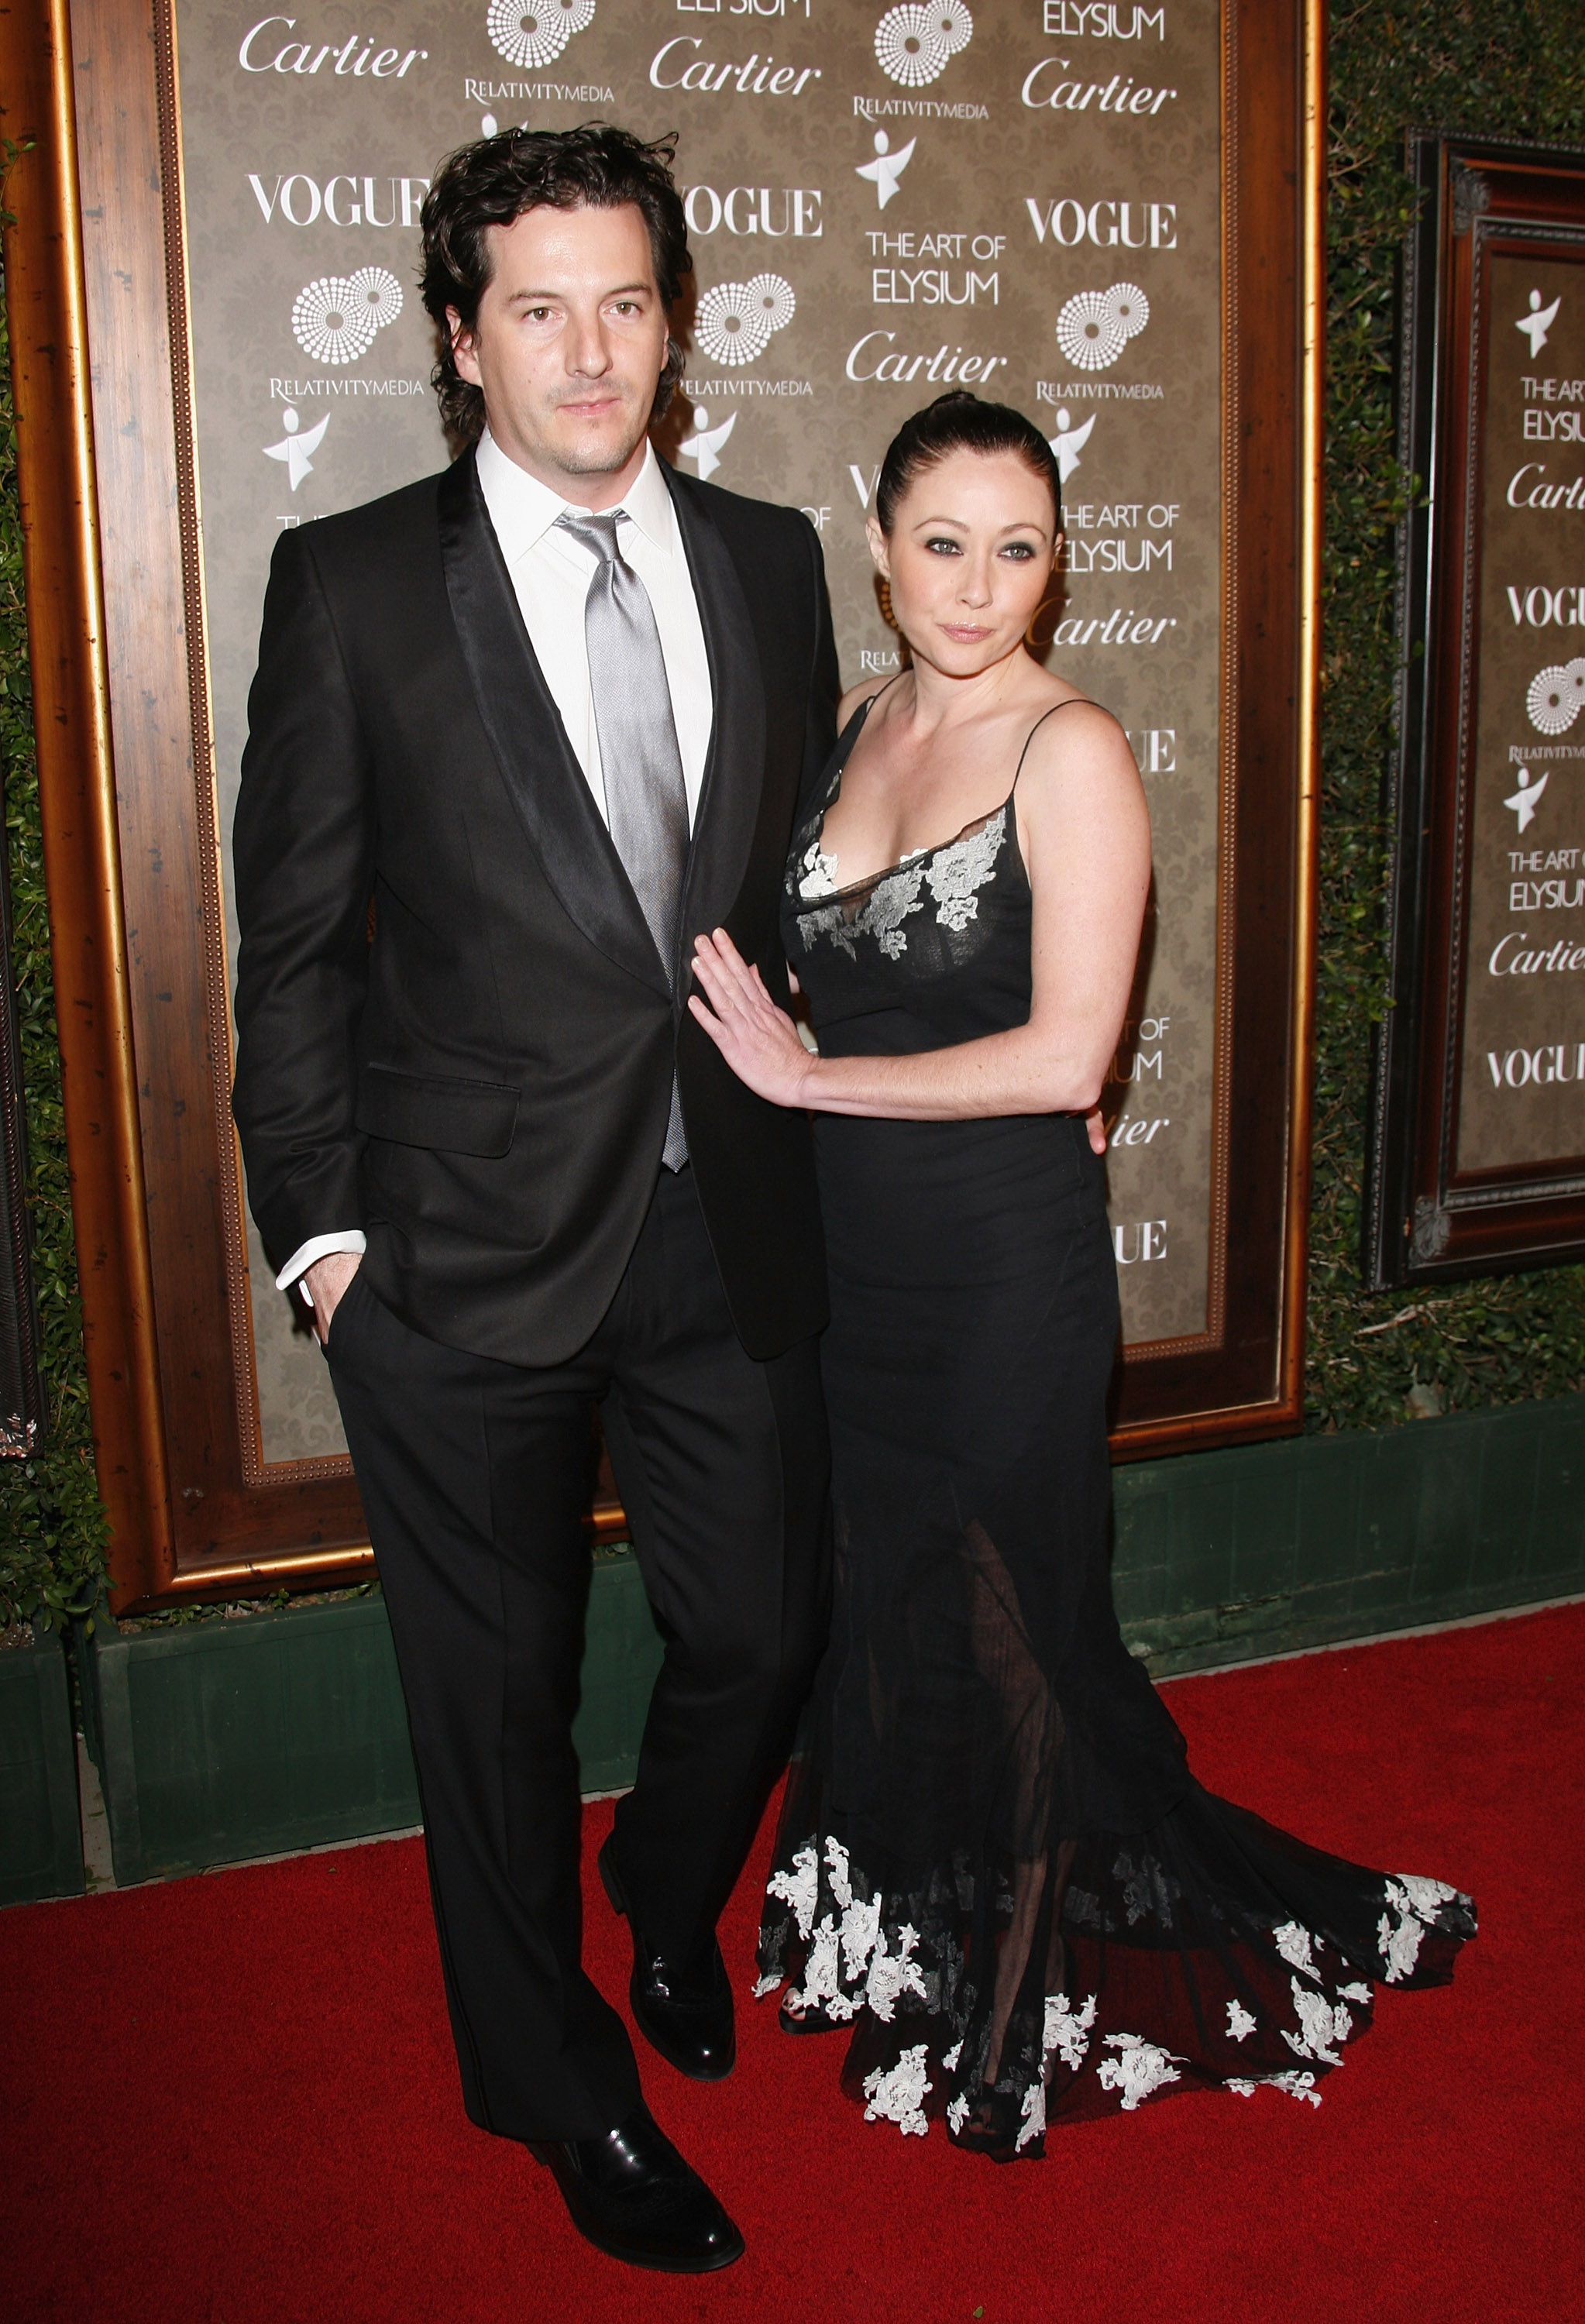 Kurt Iswarienko and Shannen Doherty arrive at the Art of Elysium 2nd Annual Heaven Gala held in Los Angeles, California, on January 10, 2009. | Source: Getty Images